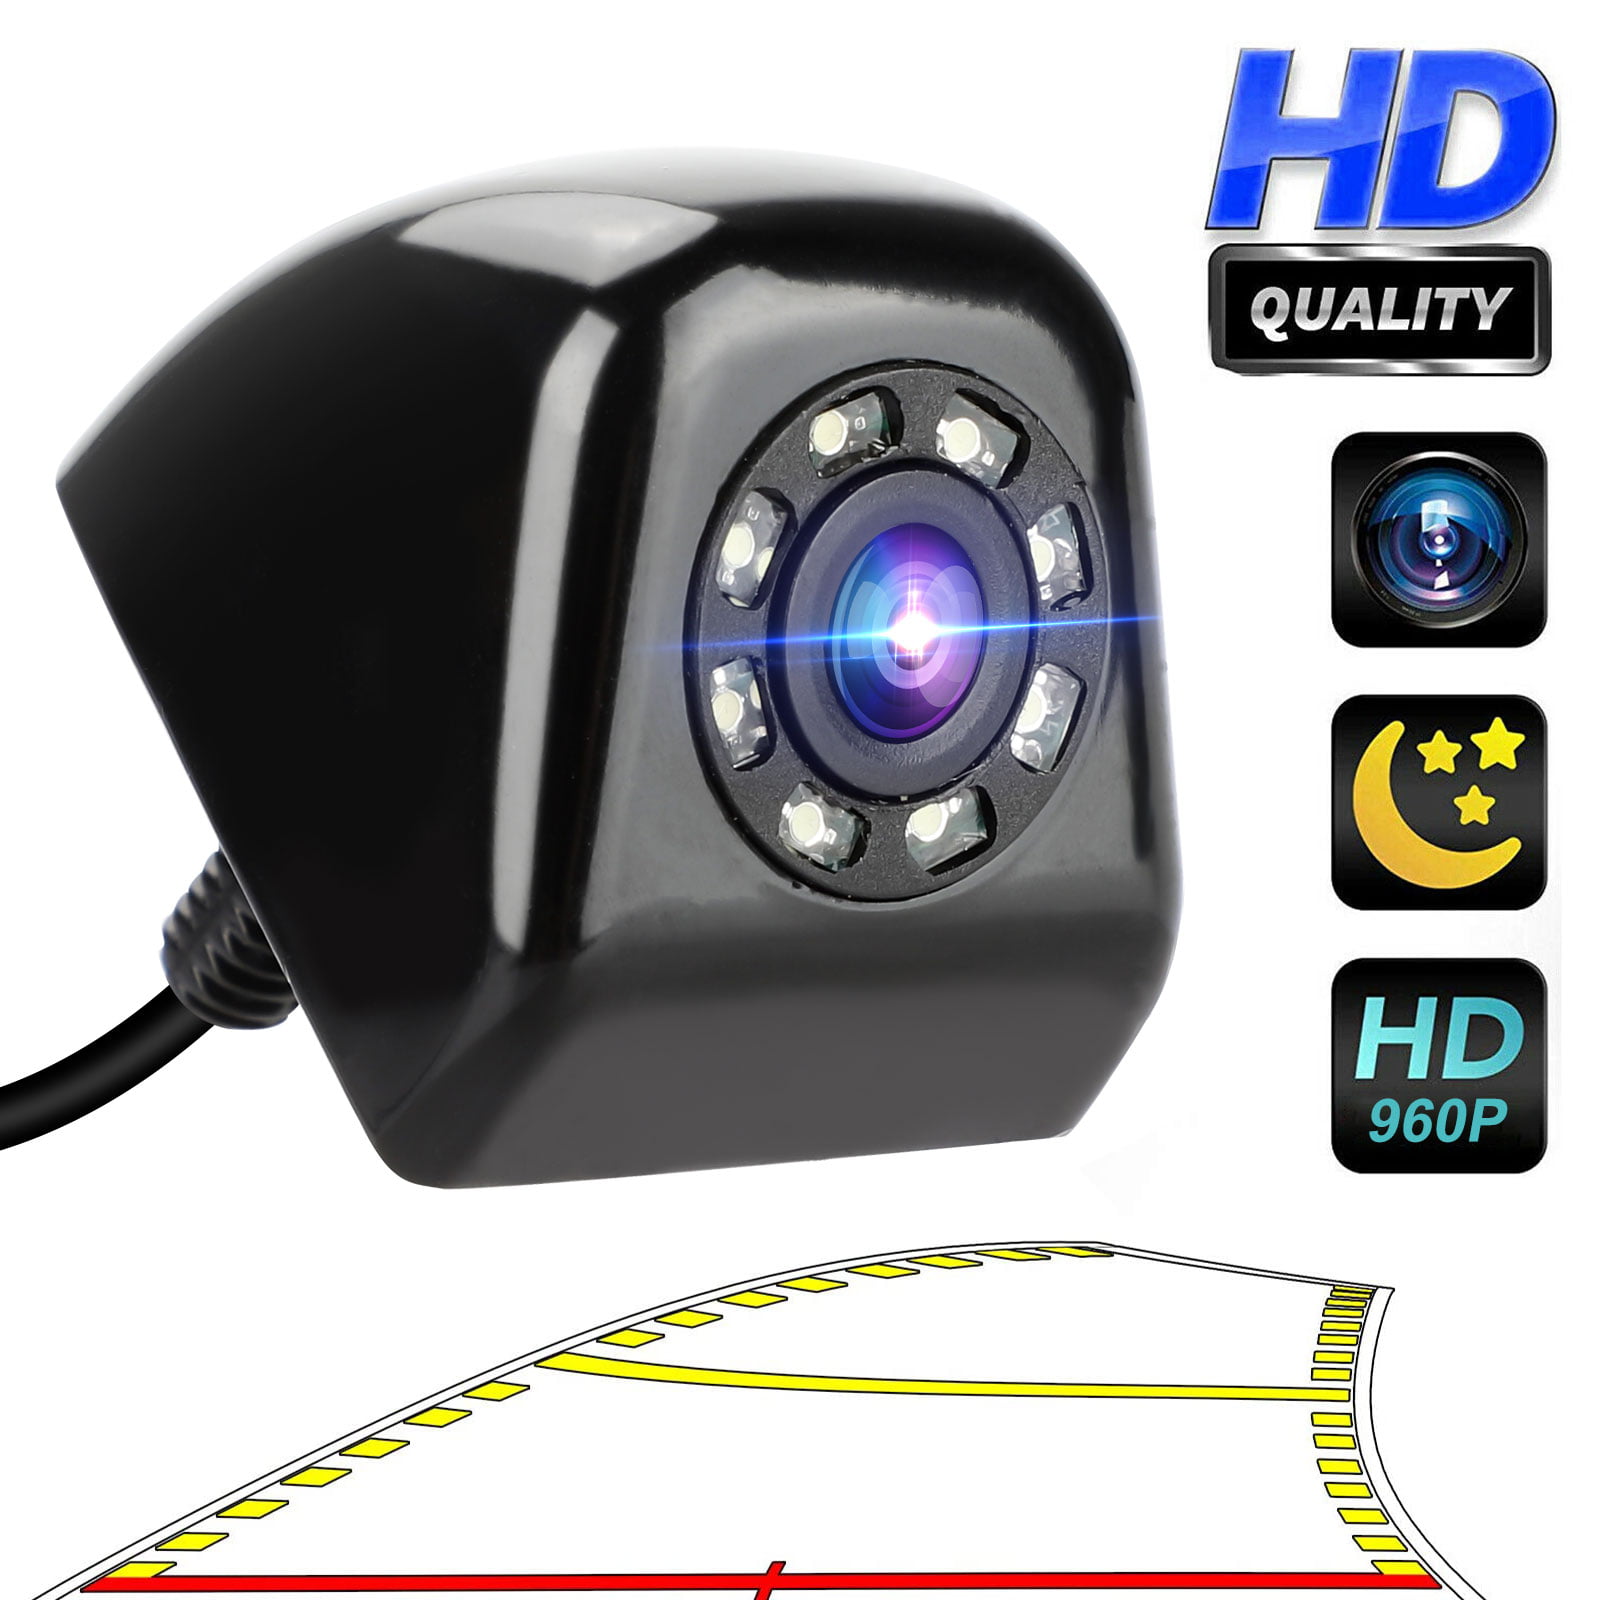 Backup Camera Esky 170 Degree Wide Angle 8 LED Night Vision Waterproof HD CMOS Vehicle Car Rear View Front View Reversing Parking Safety Camera Guideline Mode Selection ONE Button Control 